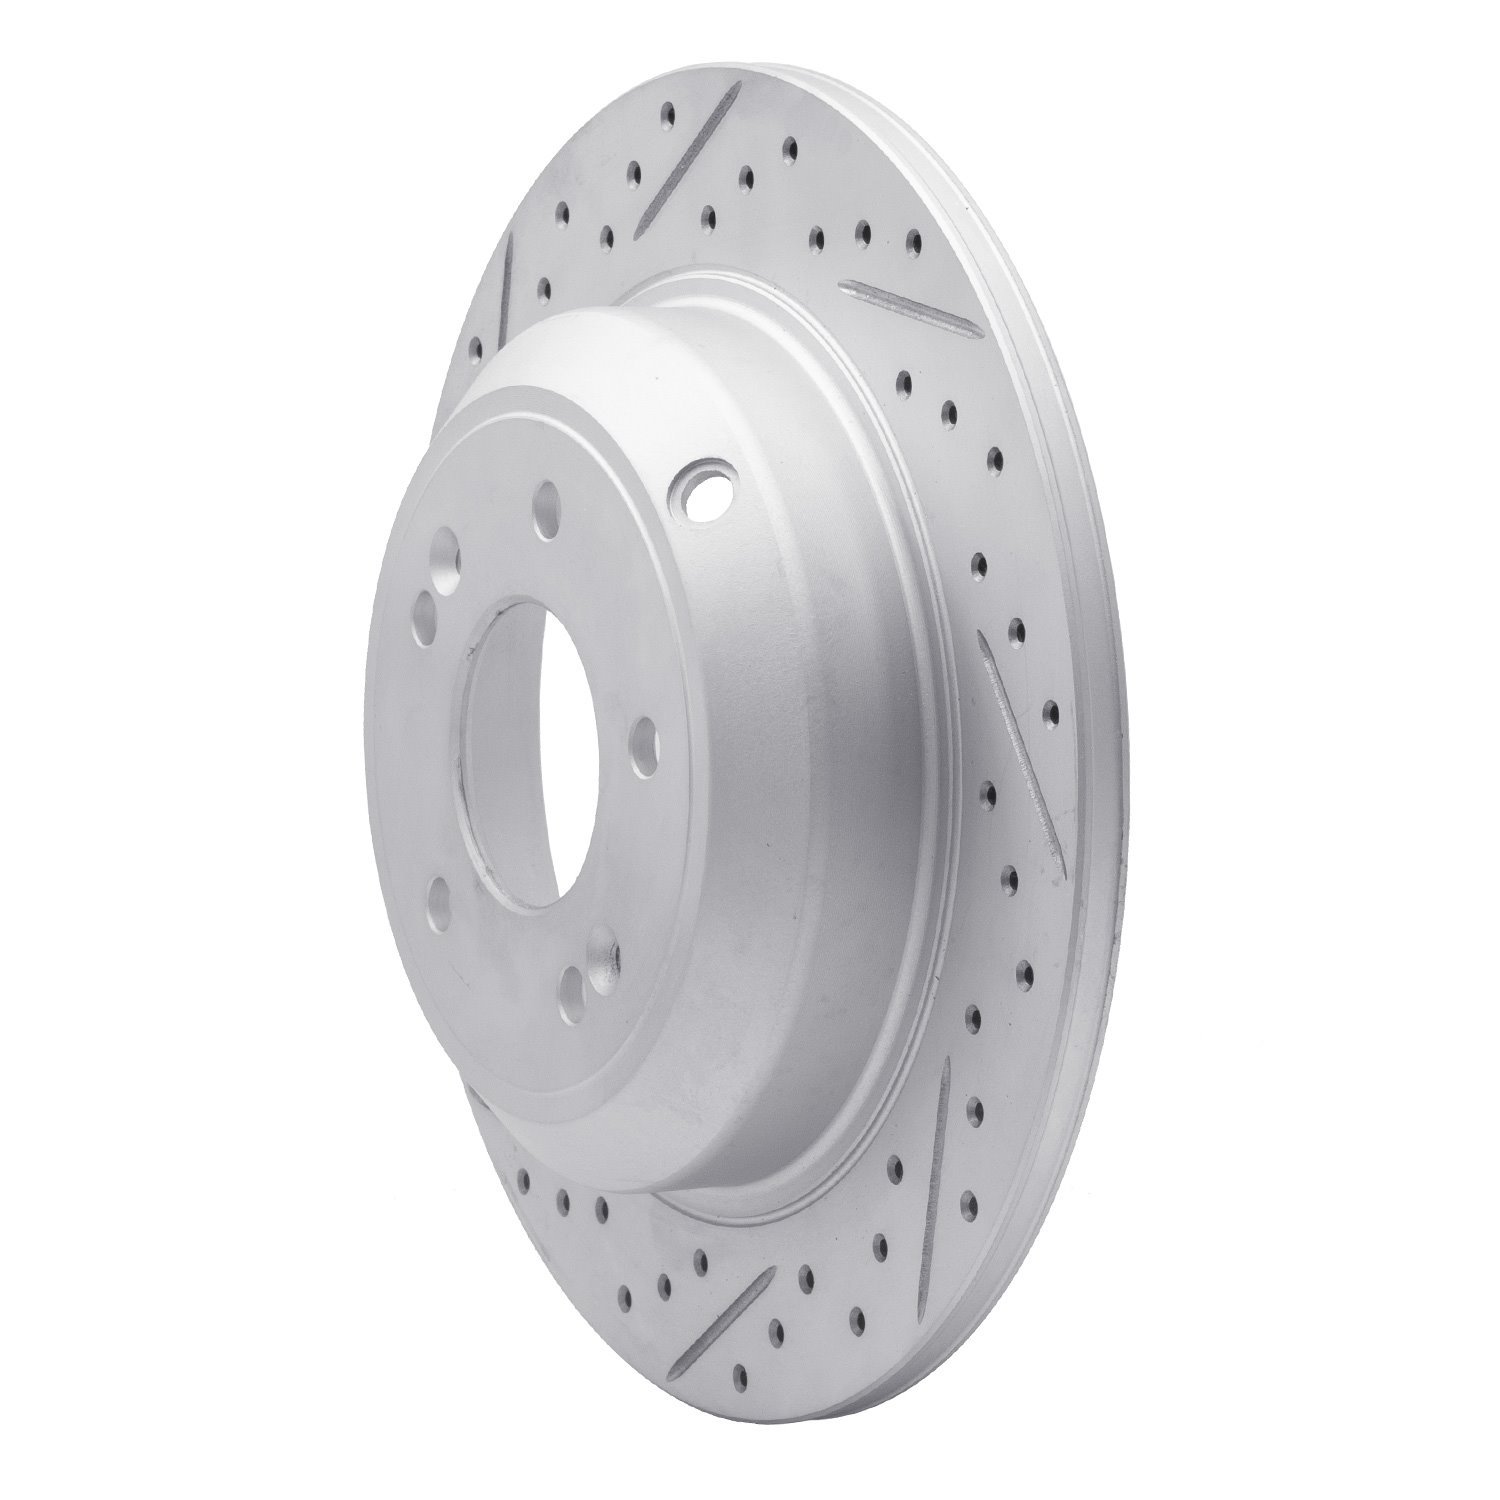 830-21041R Geoperformance Drilled/Slotted Brake Rotor, Fits Select Kia/Hyundai/Genesis, Position: Rear Right